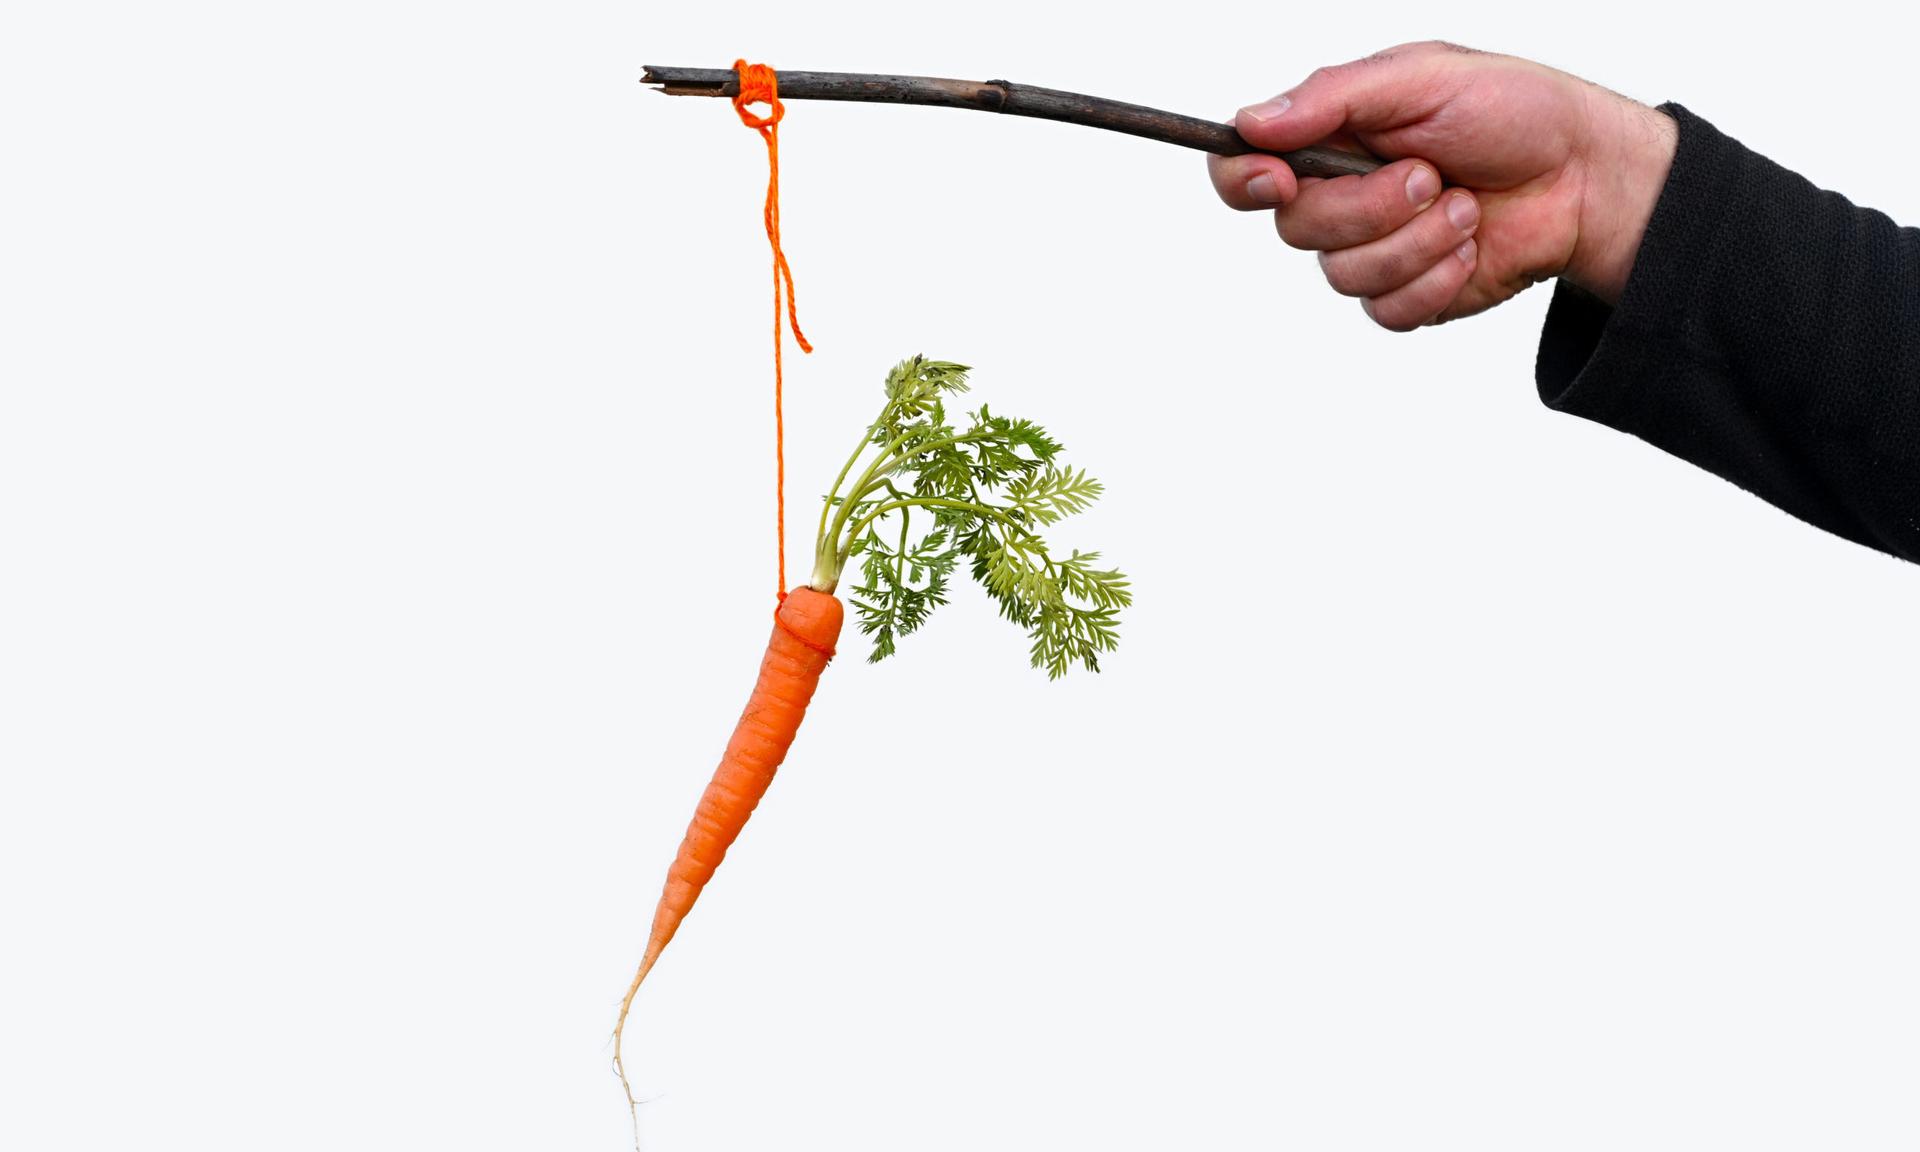 Carrot or stick? Experts recommend using positive reinforcement, fun and rewards as a means to keep employees engaged and interested in their cybersecurity awareness training. (Photo credit: chameleonseye/iStock via Getty Images)